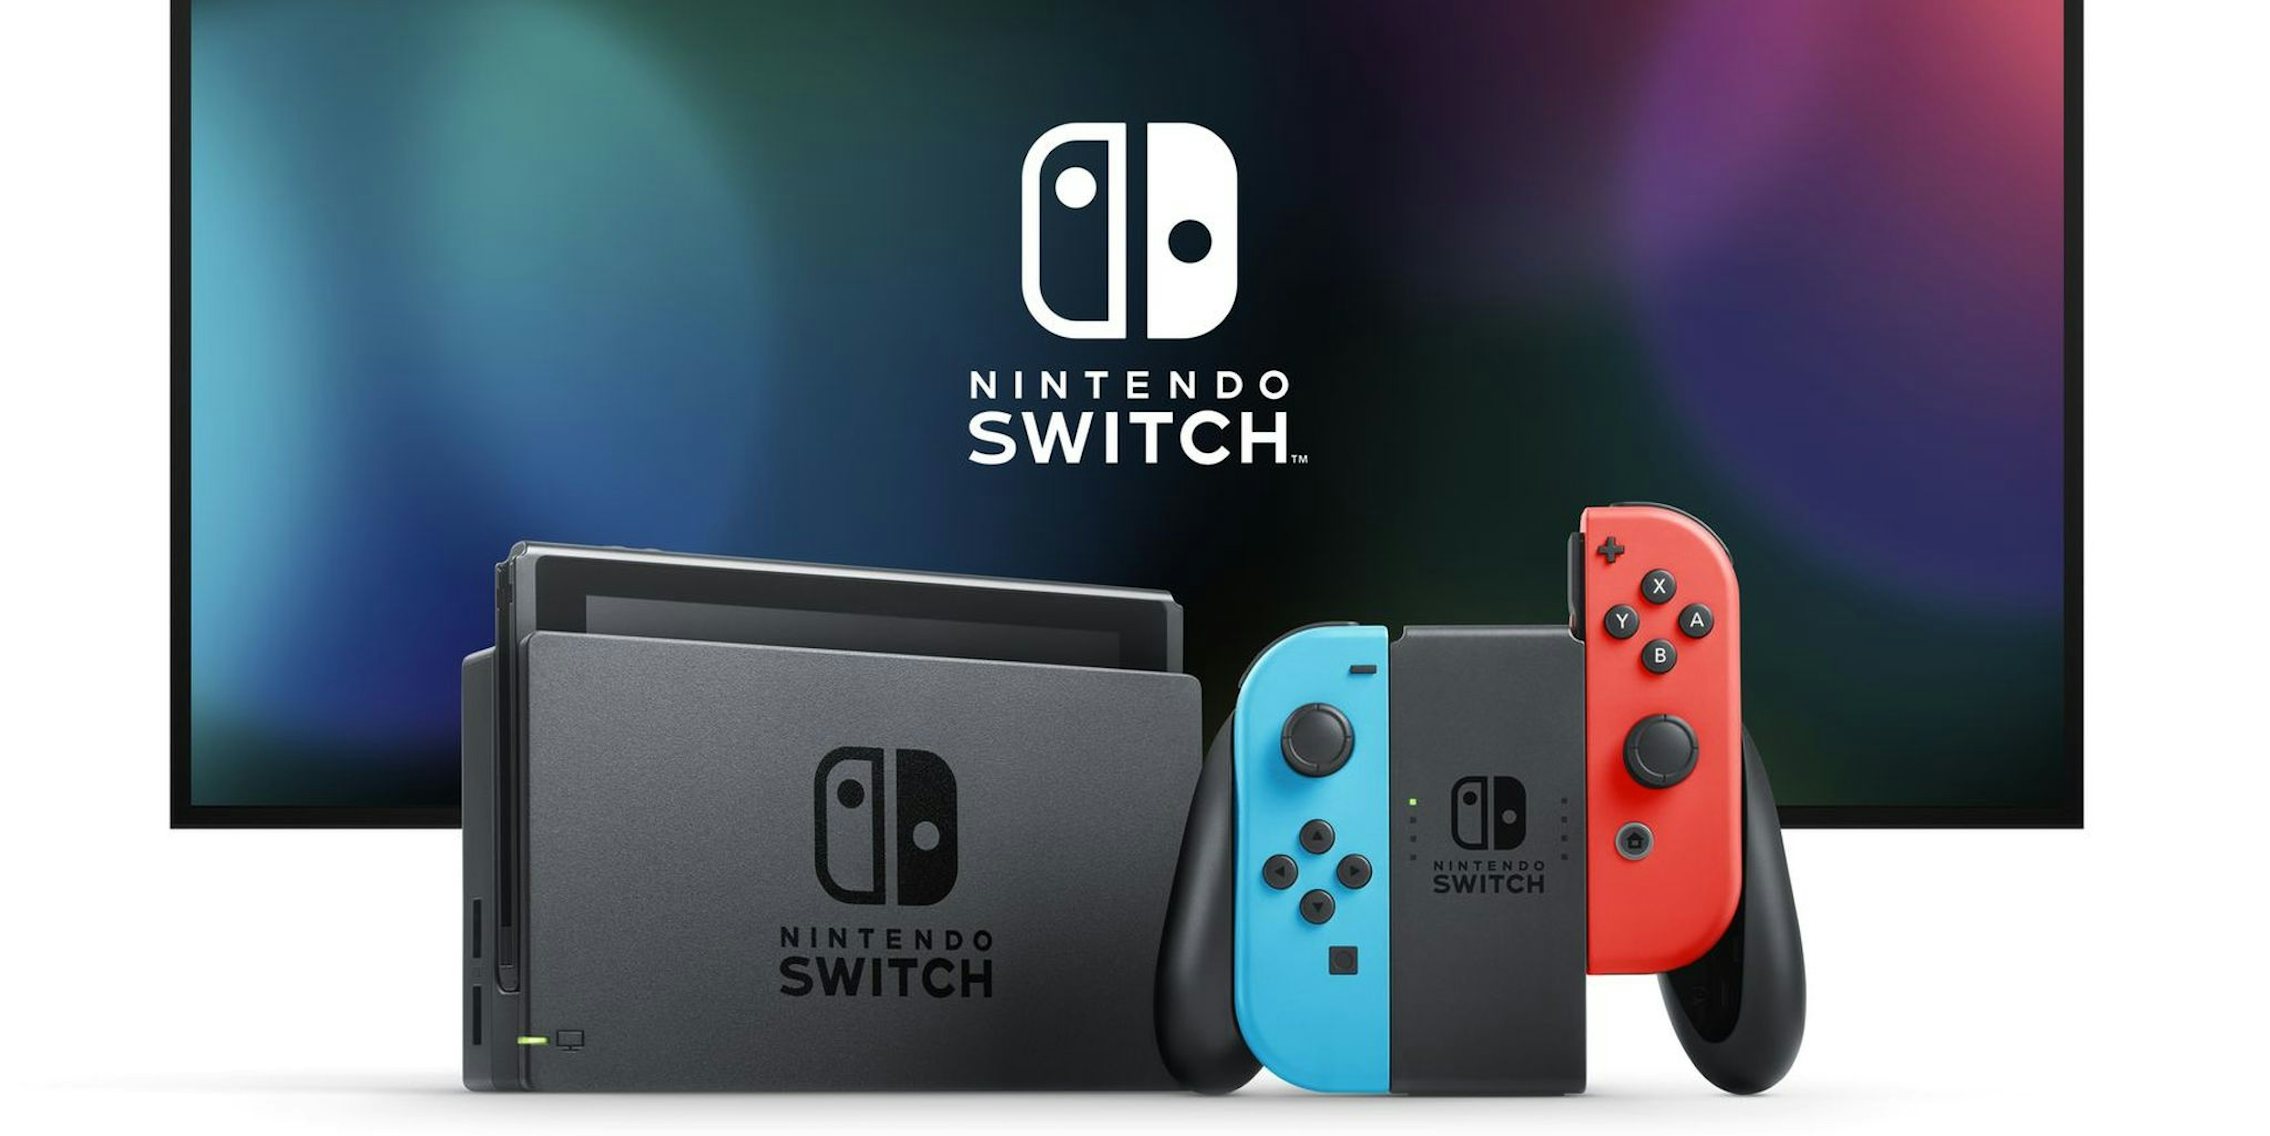 Binding of Isaac leads pack of today's new Nintendo Switch games